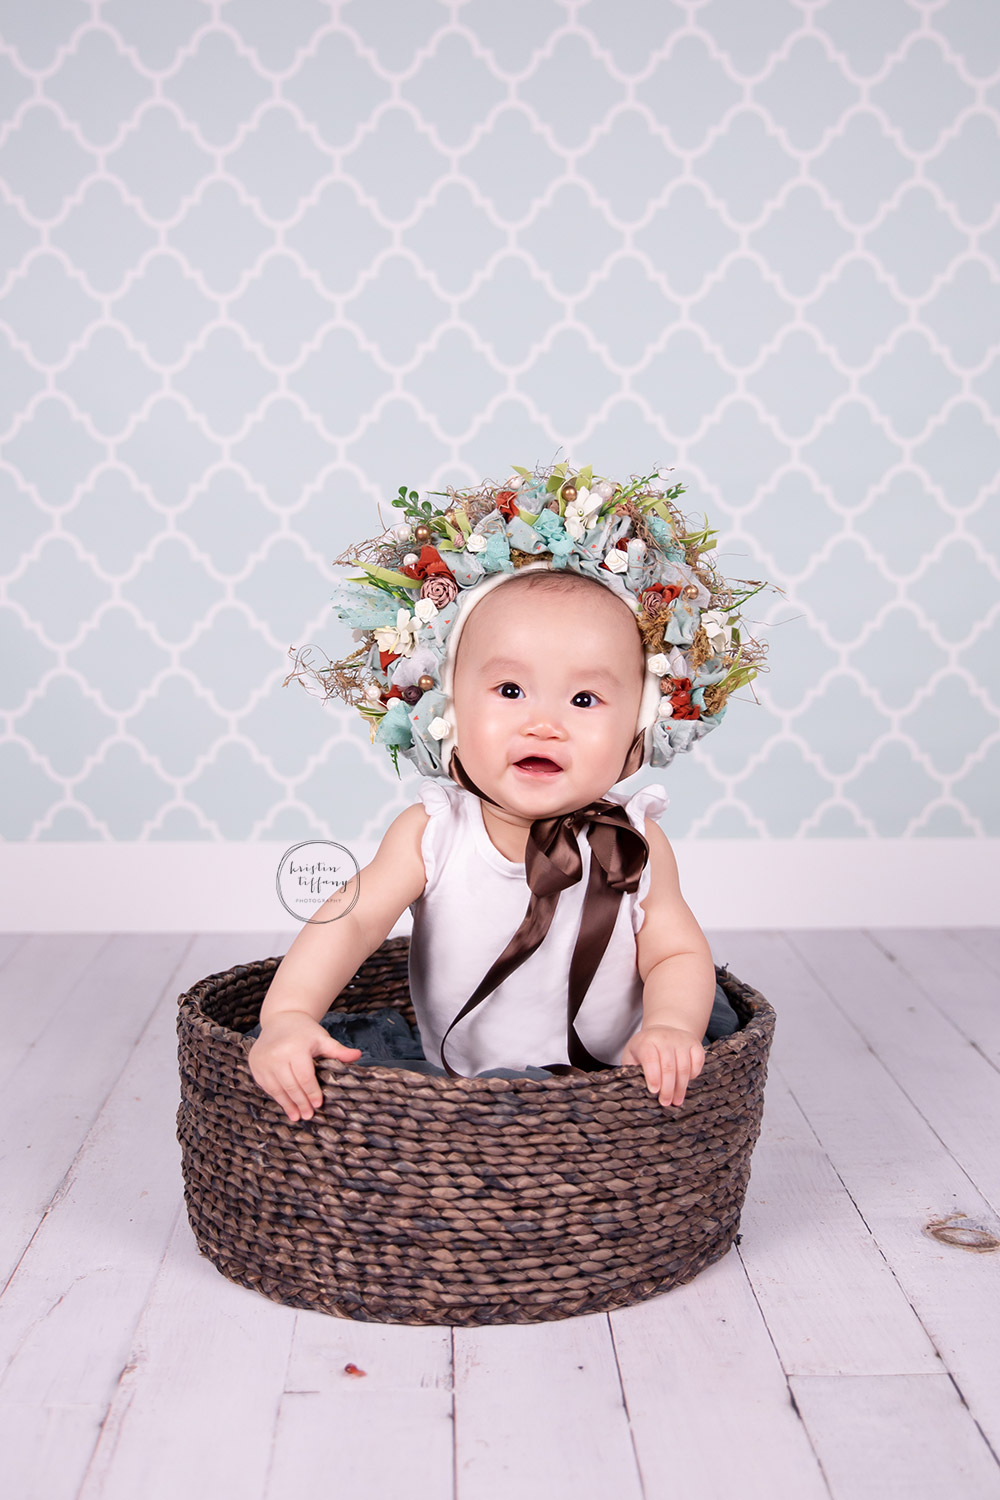 a photo of a baby girl in a floral bonnet